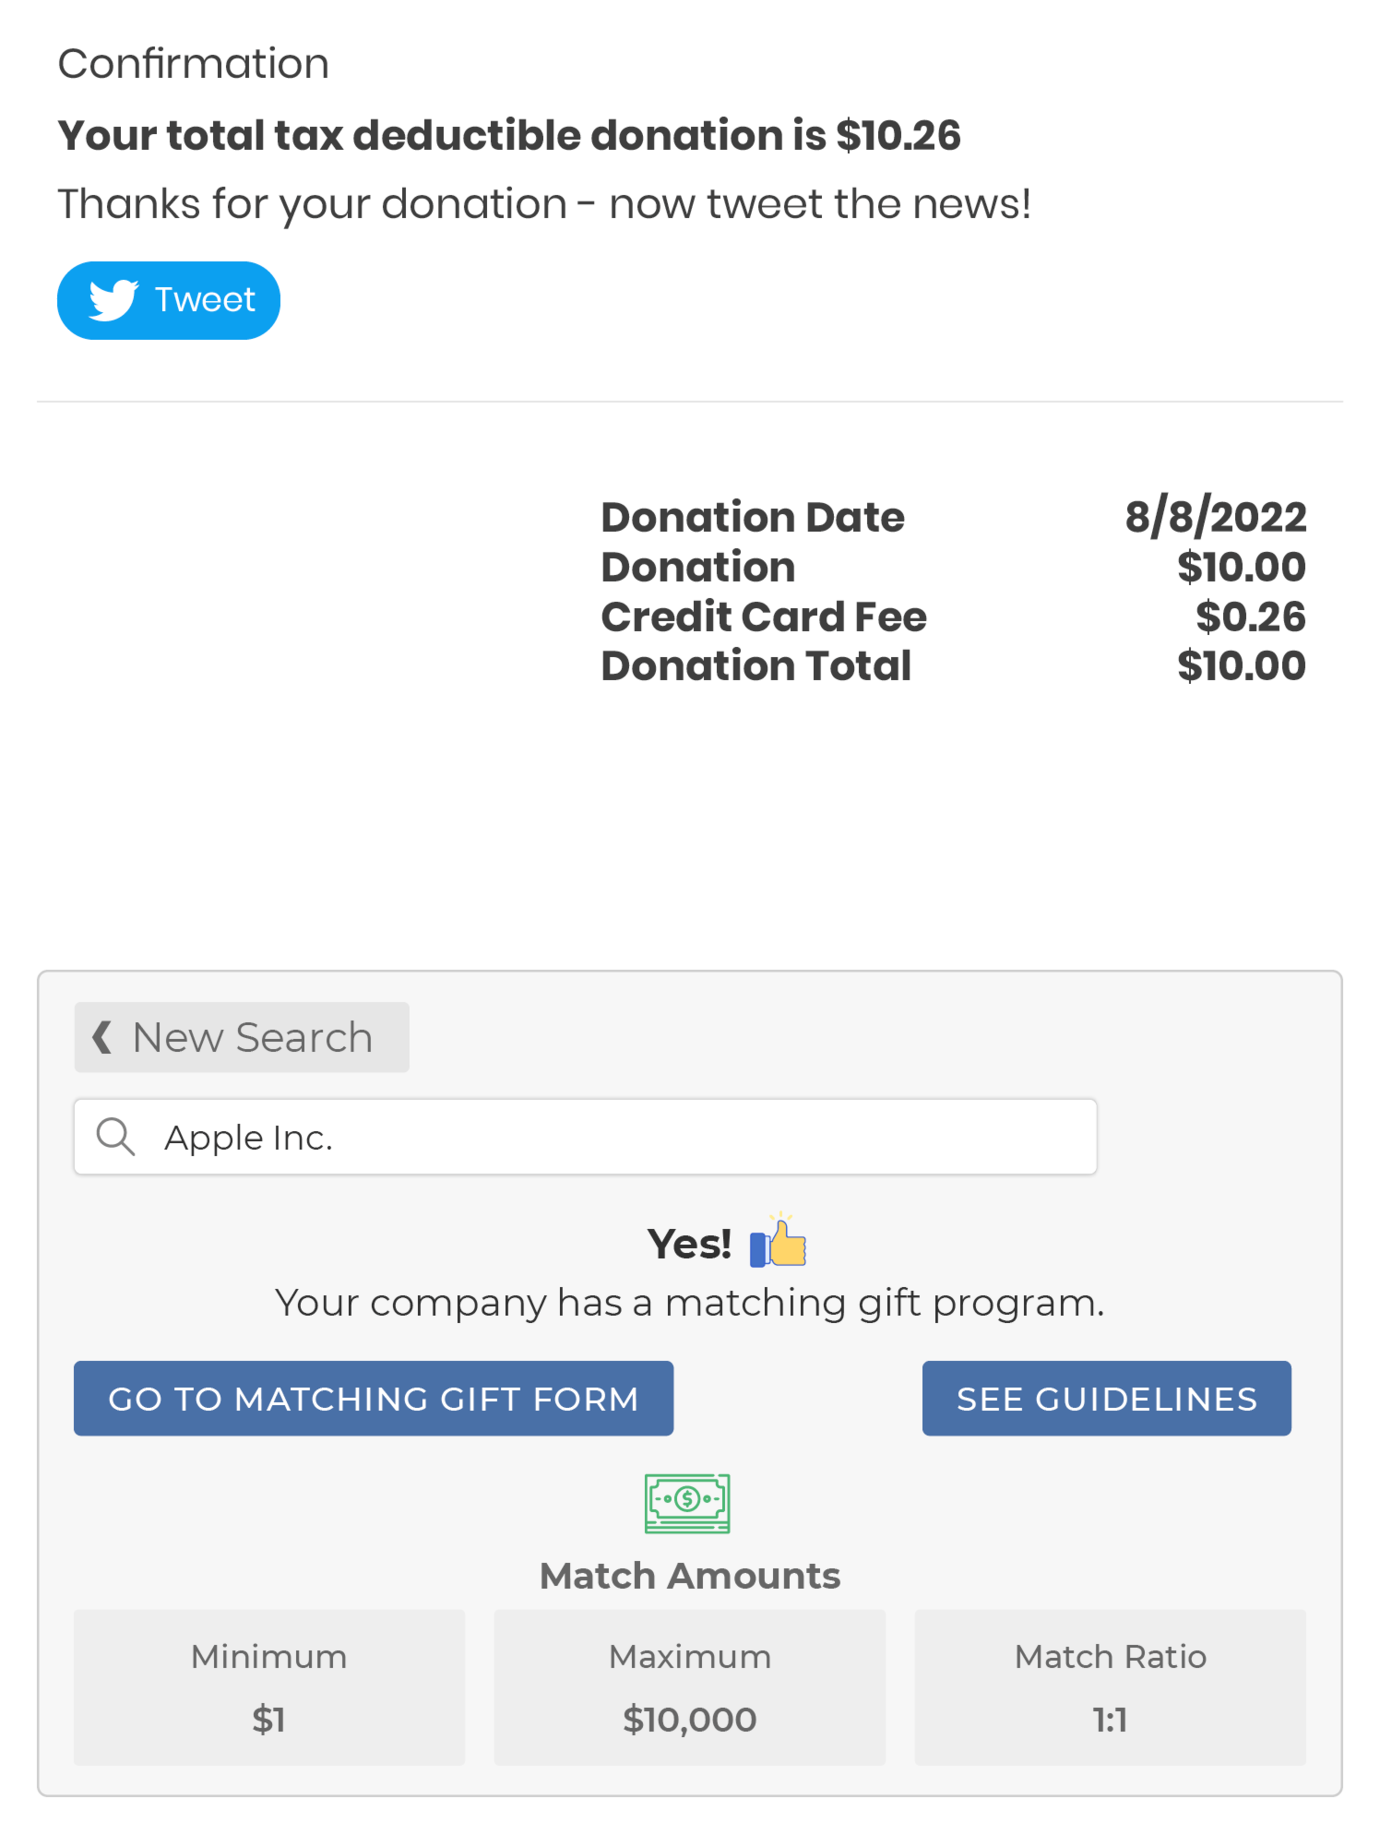 Example matching gift confirmation page from the Pan Mass Challenge